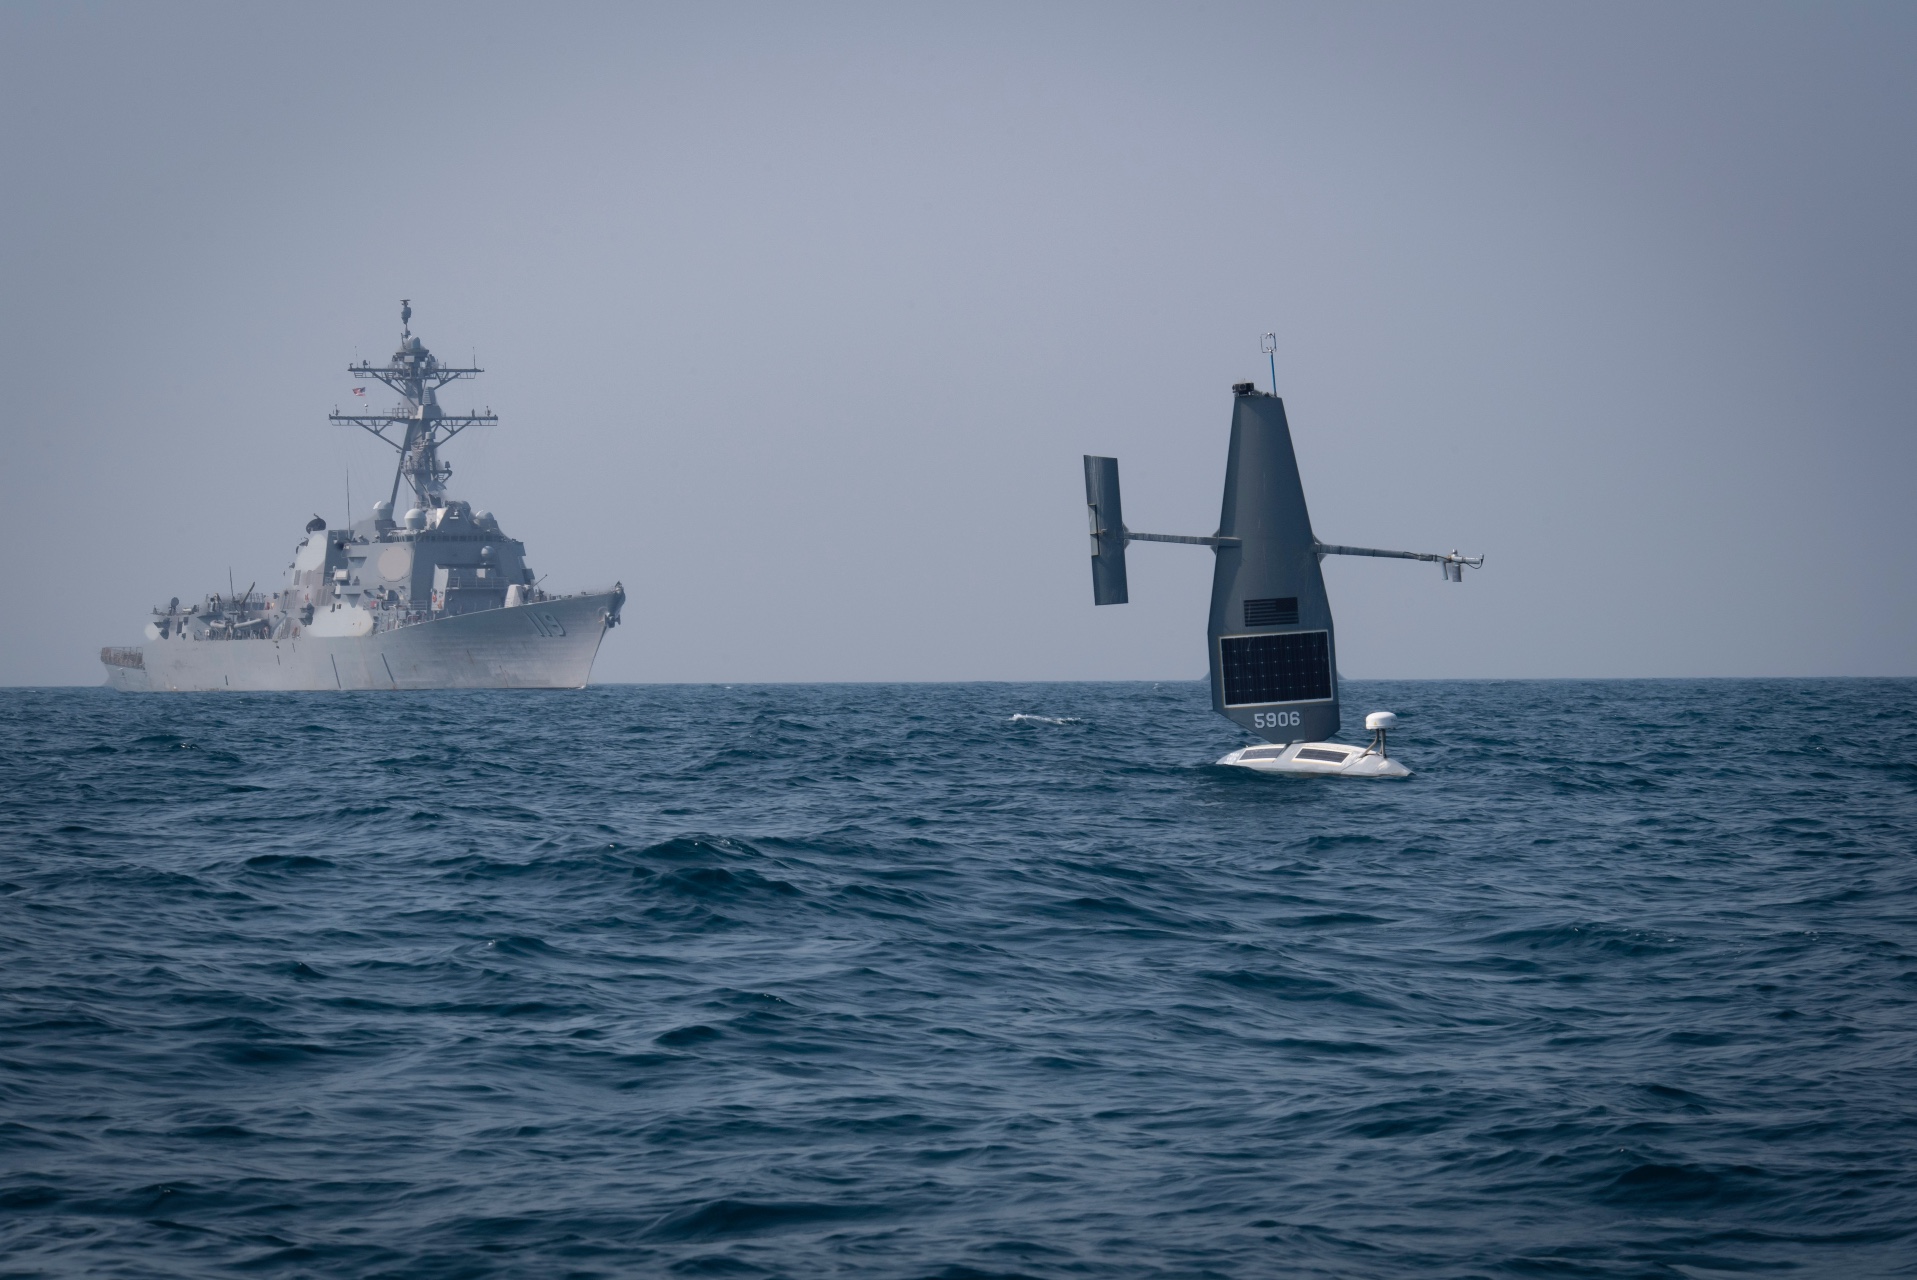 Saildrone Explorer unmanned surface vessel (USV) operates with guided-missile destroyer USS Delbert D. Black (DDG 119) in the Arabian Gulf during exercise Phantom Scope, Oct. 7.